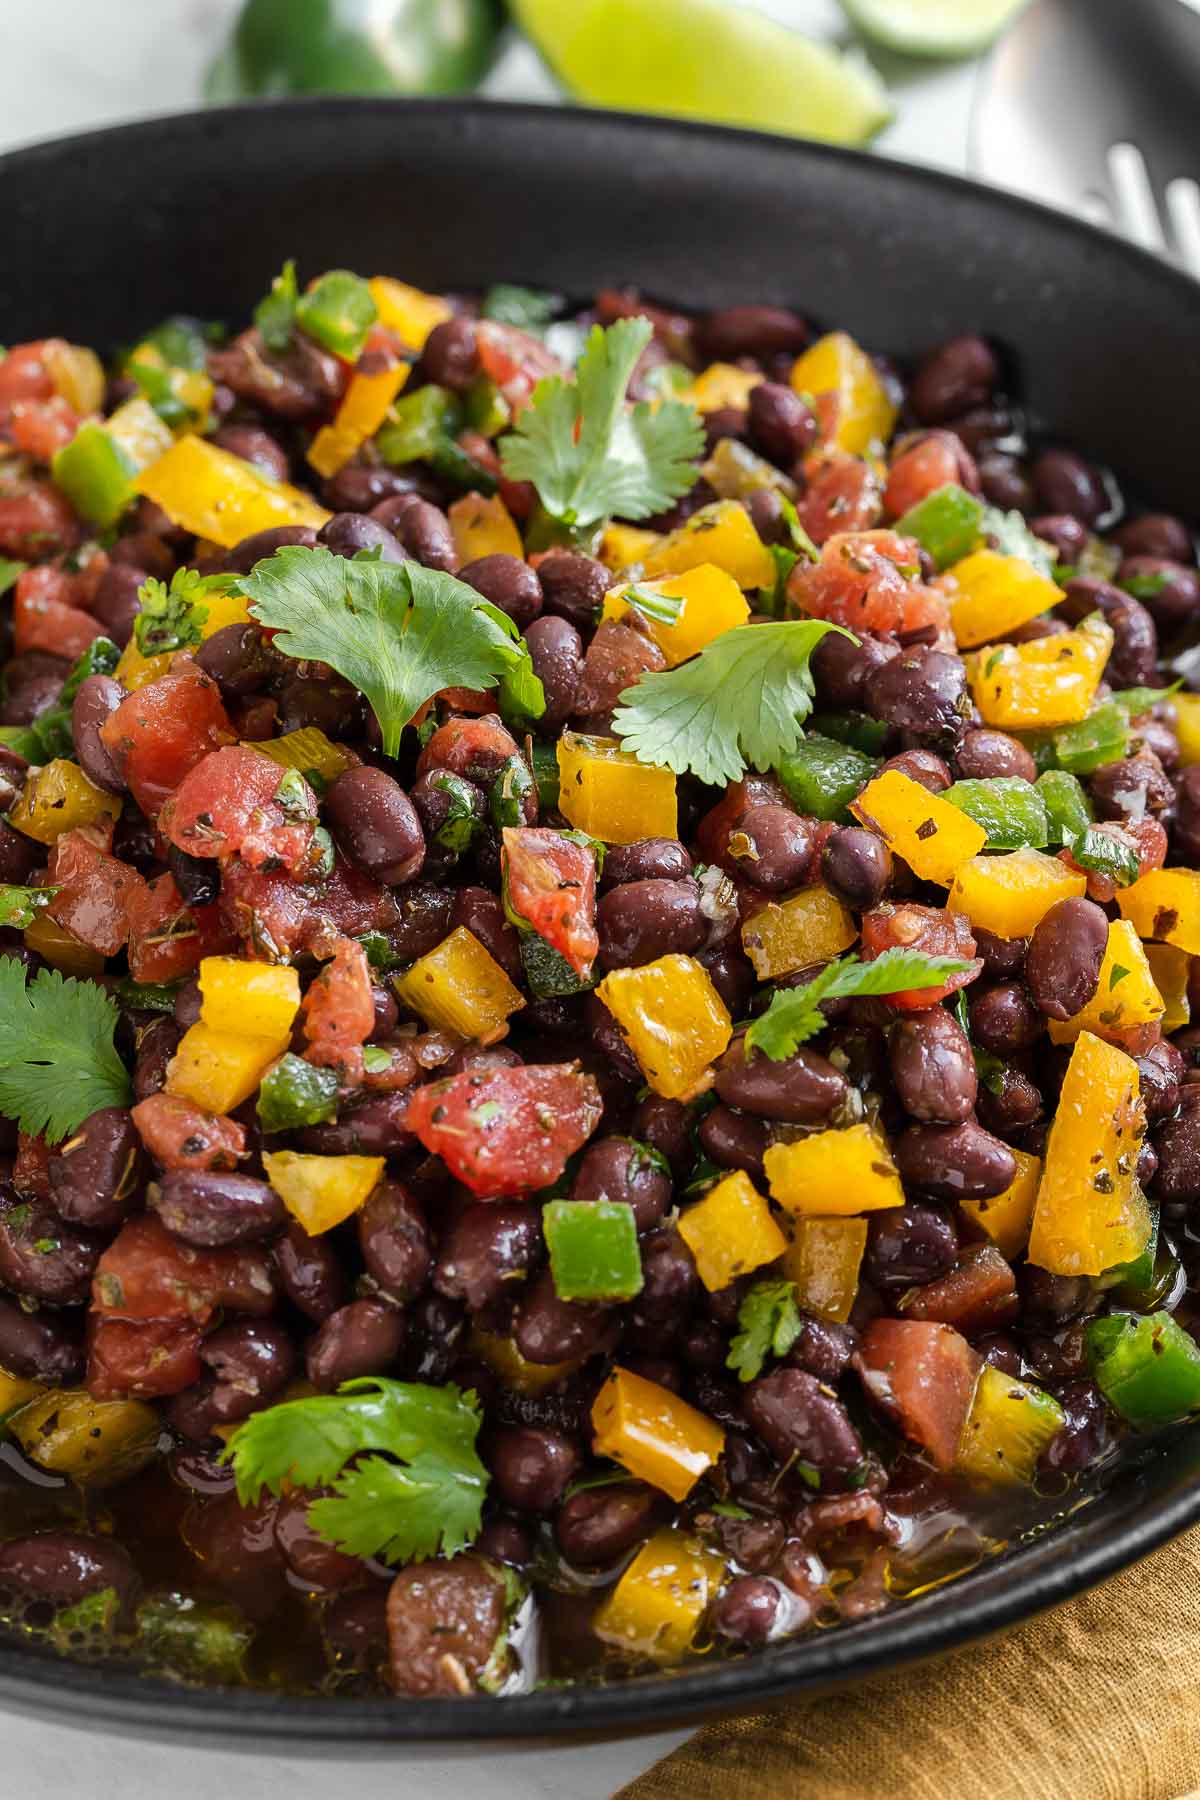 Black bean salad with peppers and cilantro, no corn.